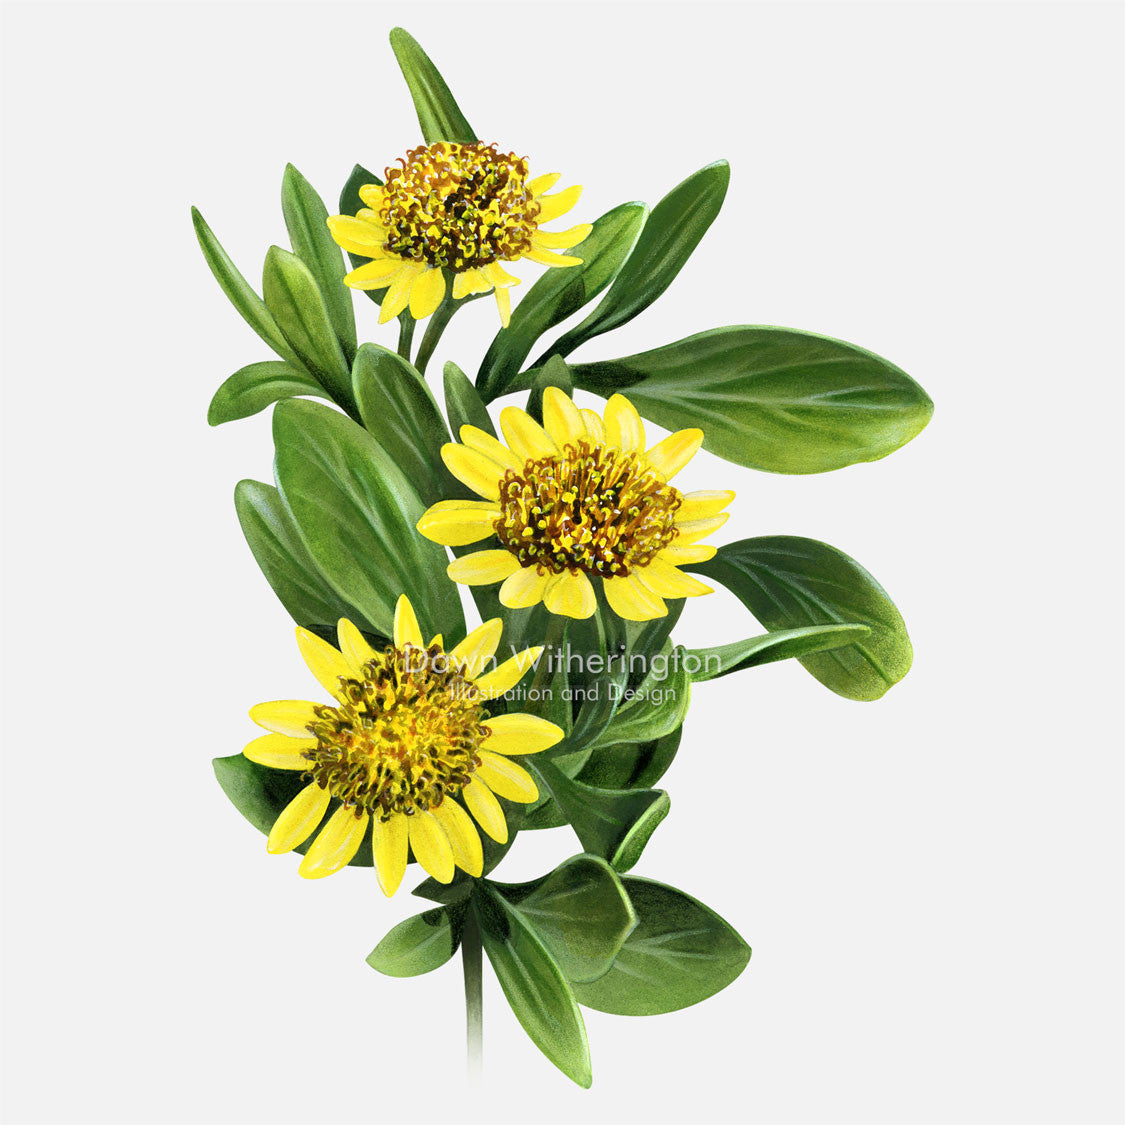 This beautiful illustration of bushy sea oxeye daisy, Borrichia frutescens, is botanically accurate in detail.